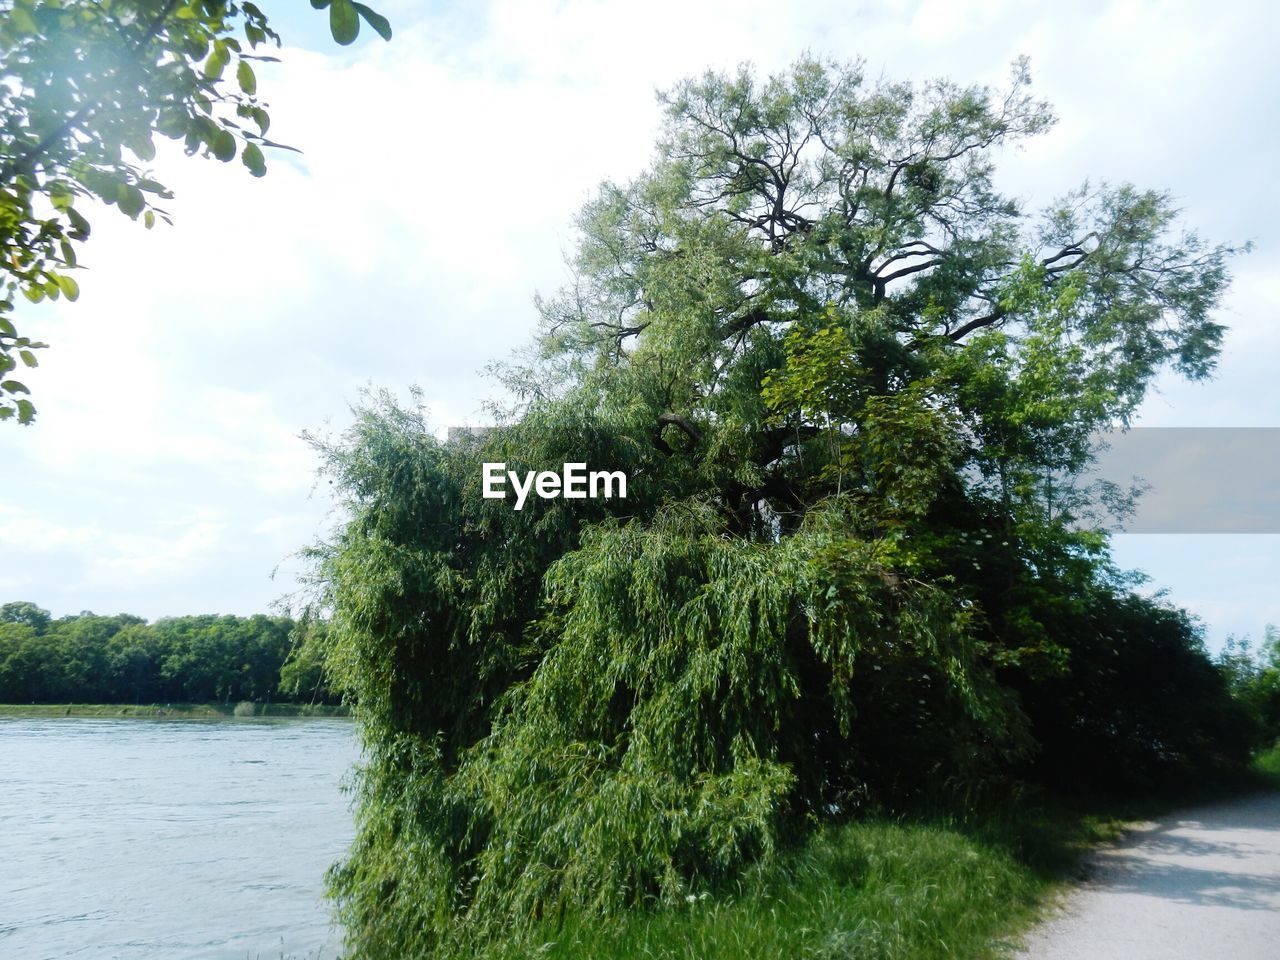 Trees on riverbank